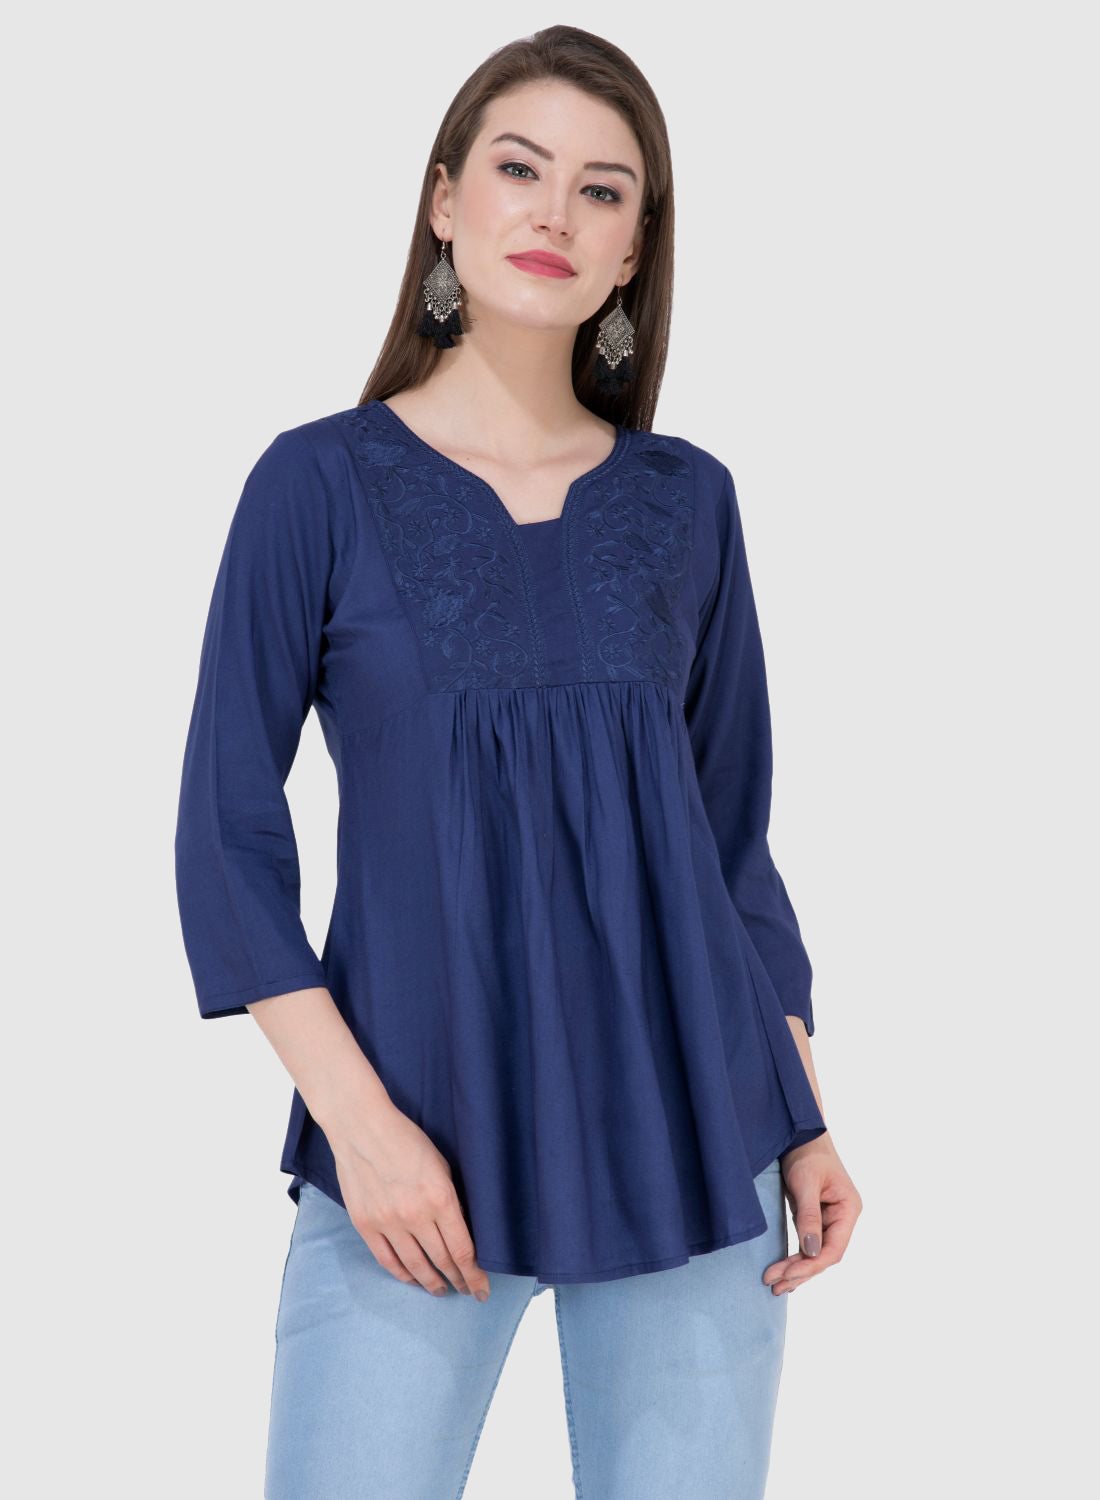 Women Top R Blue Rayon Casual Regular Fit 3/4 Sleeve Fit and Flare